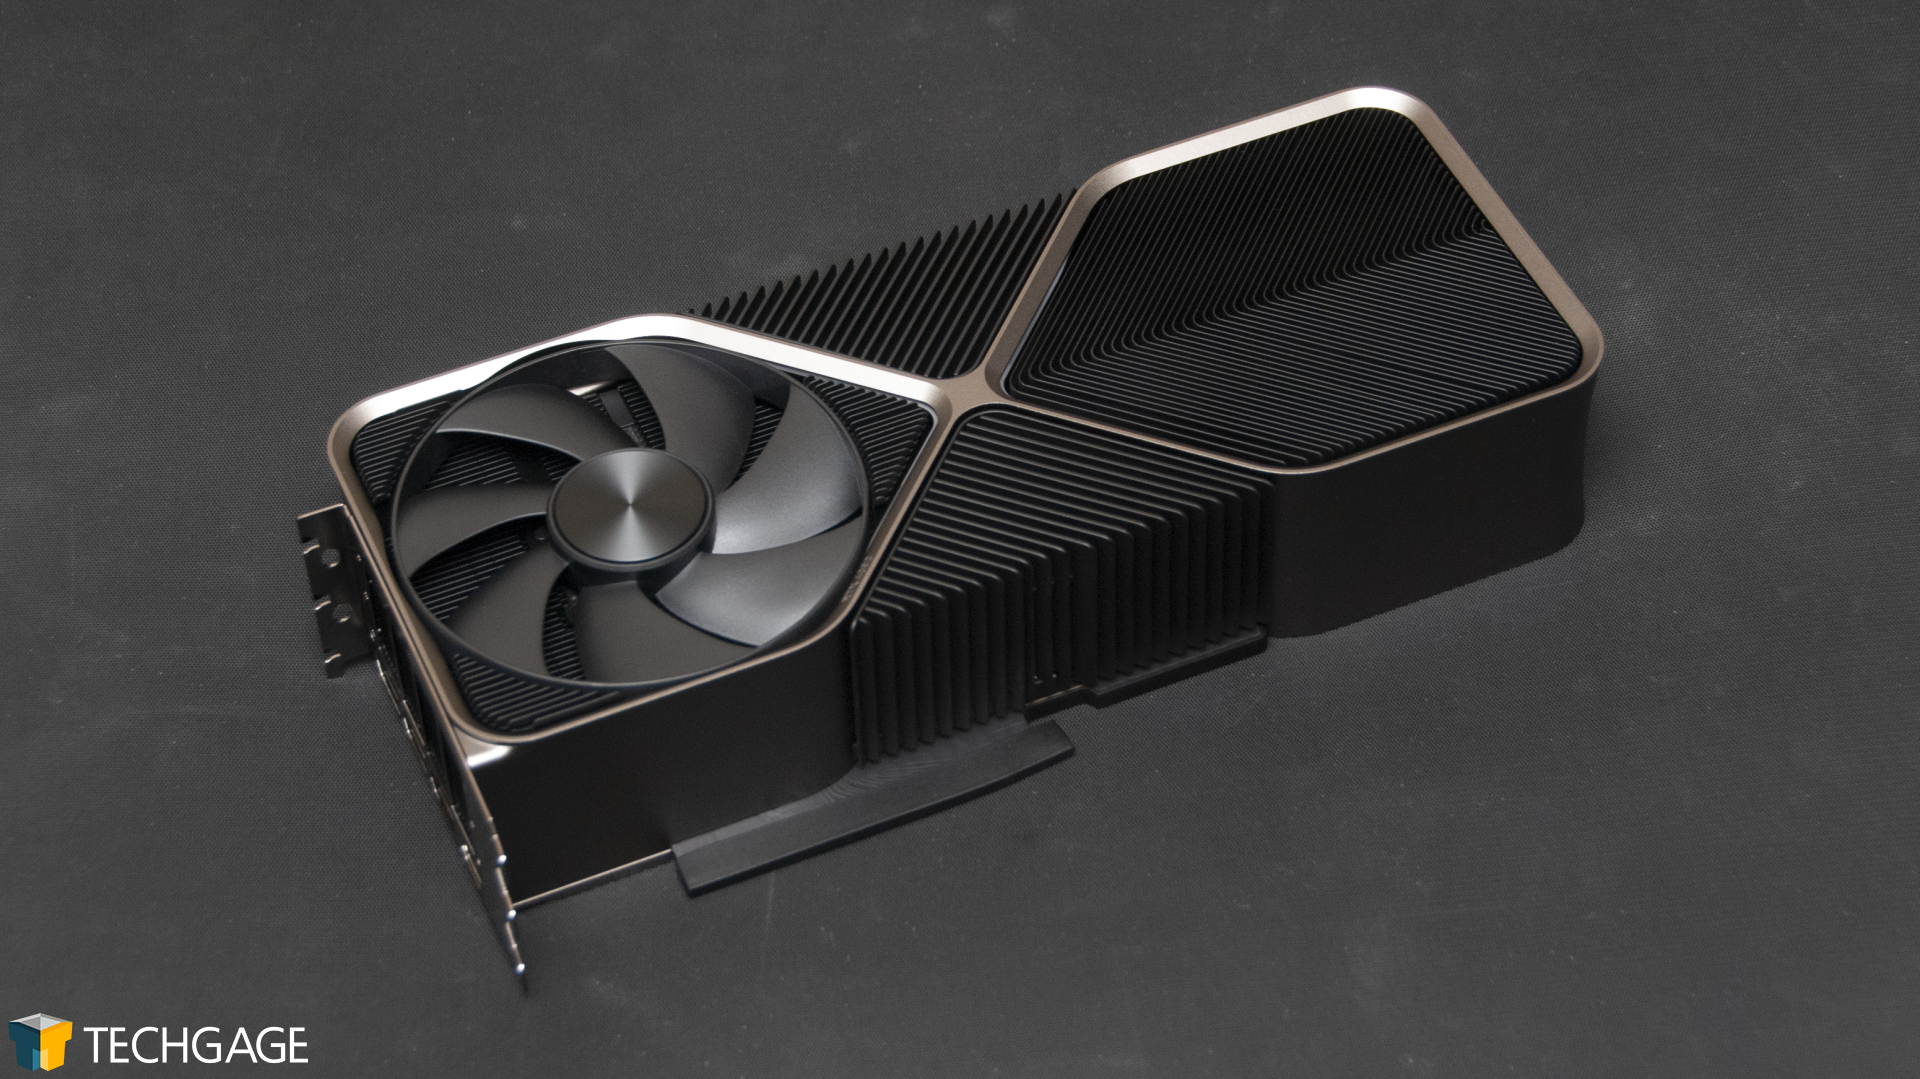 Nvidia GeForce RTX 4090 Will Cost $1,599, RTX 4080 Starts at $899